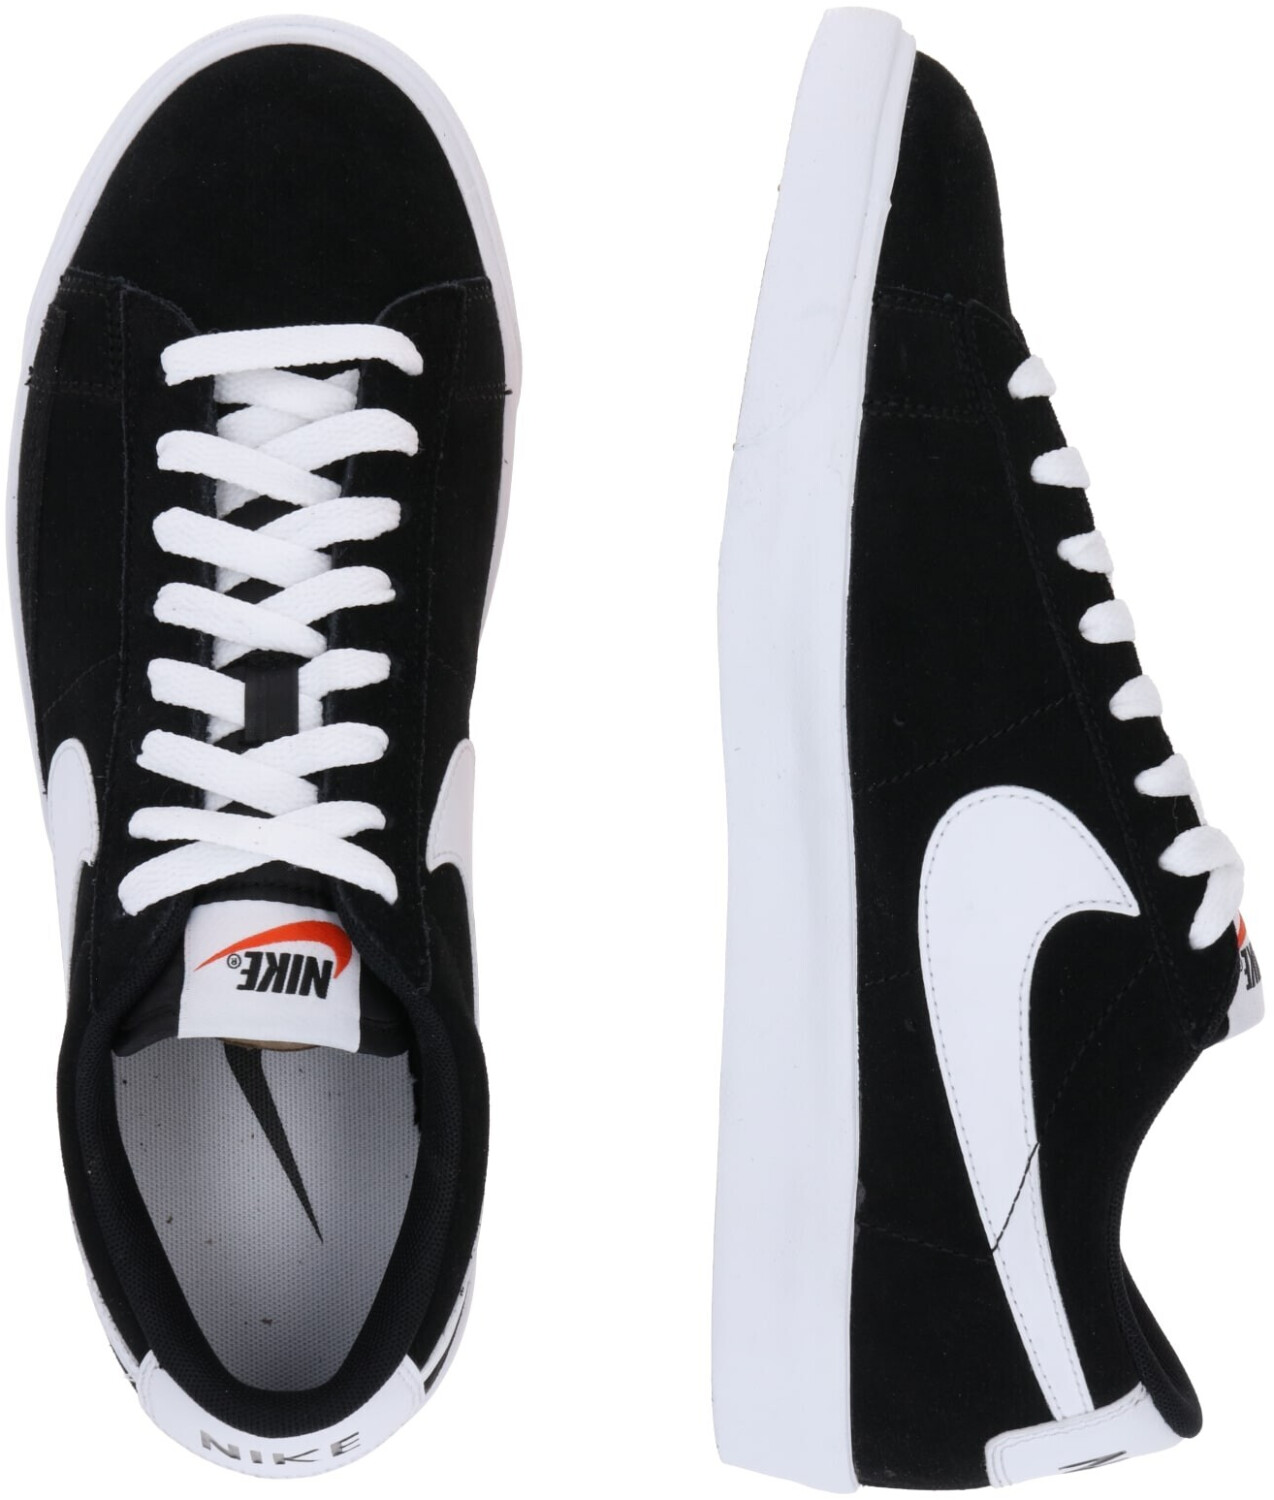 Leve centavo A rayas Buy Nike Blazer Low Premium Vintage Suede black/white from £74.99 (Today) –  Best Deals on idealo.co.uk